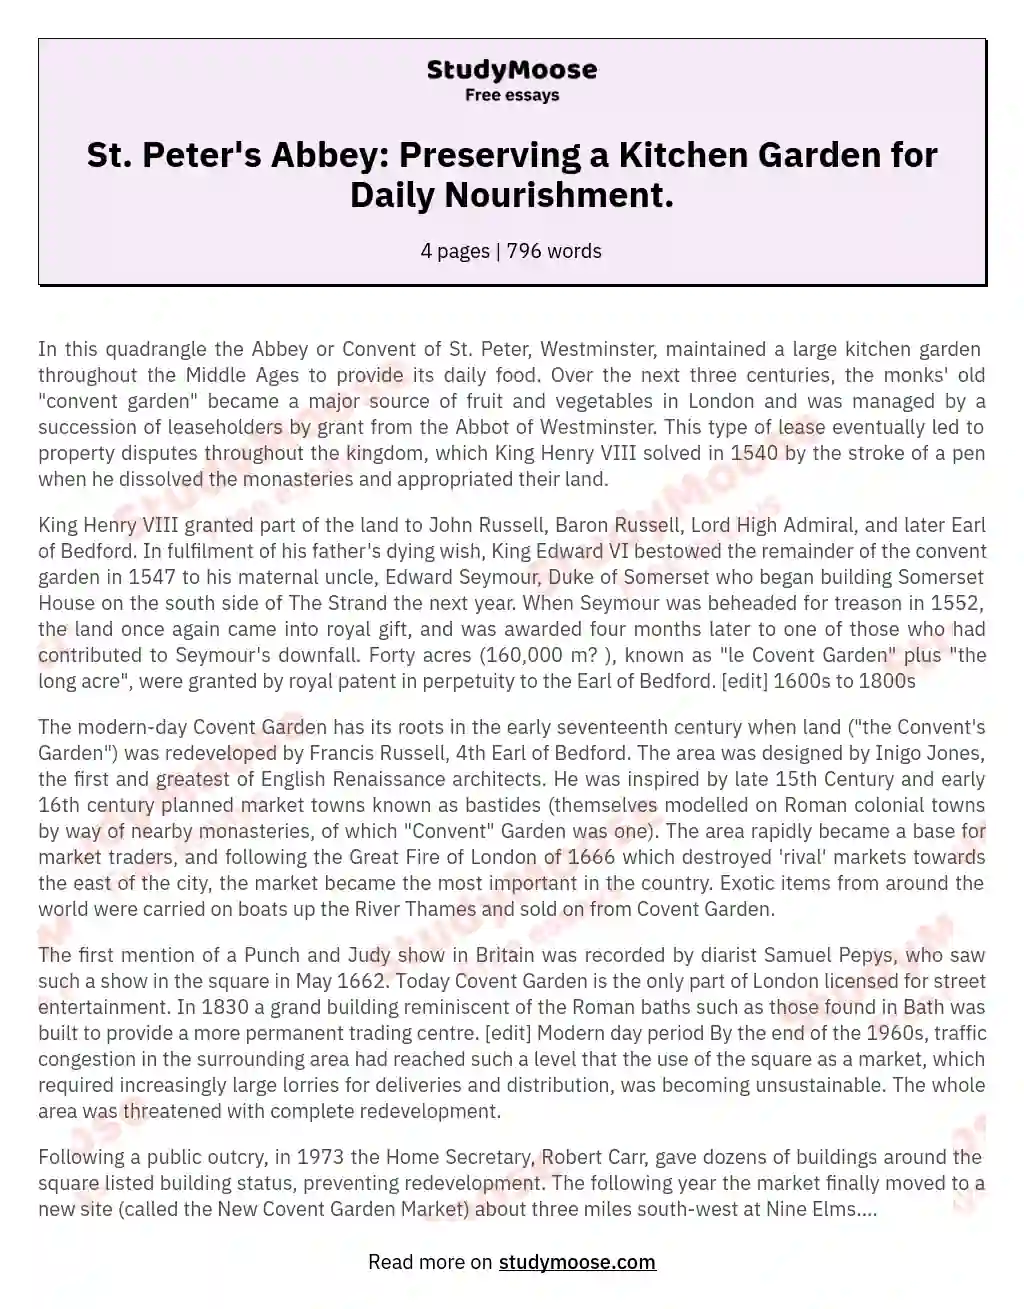 St. Peter's Abbey: Preserving a Kitchen Garden for Daily Nourishment. essay